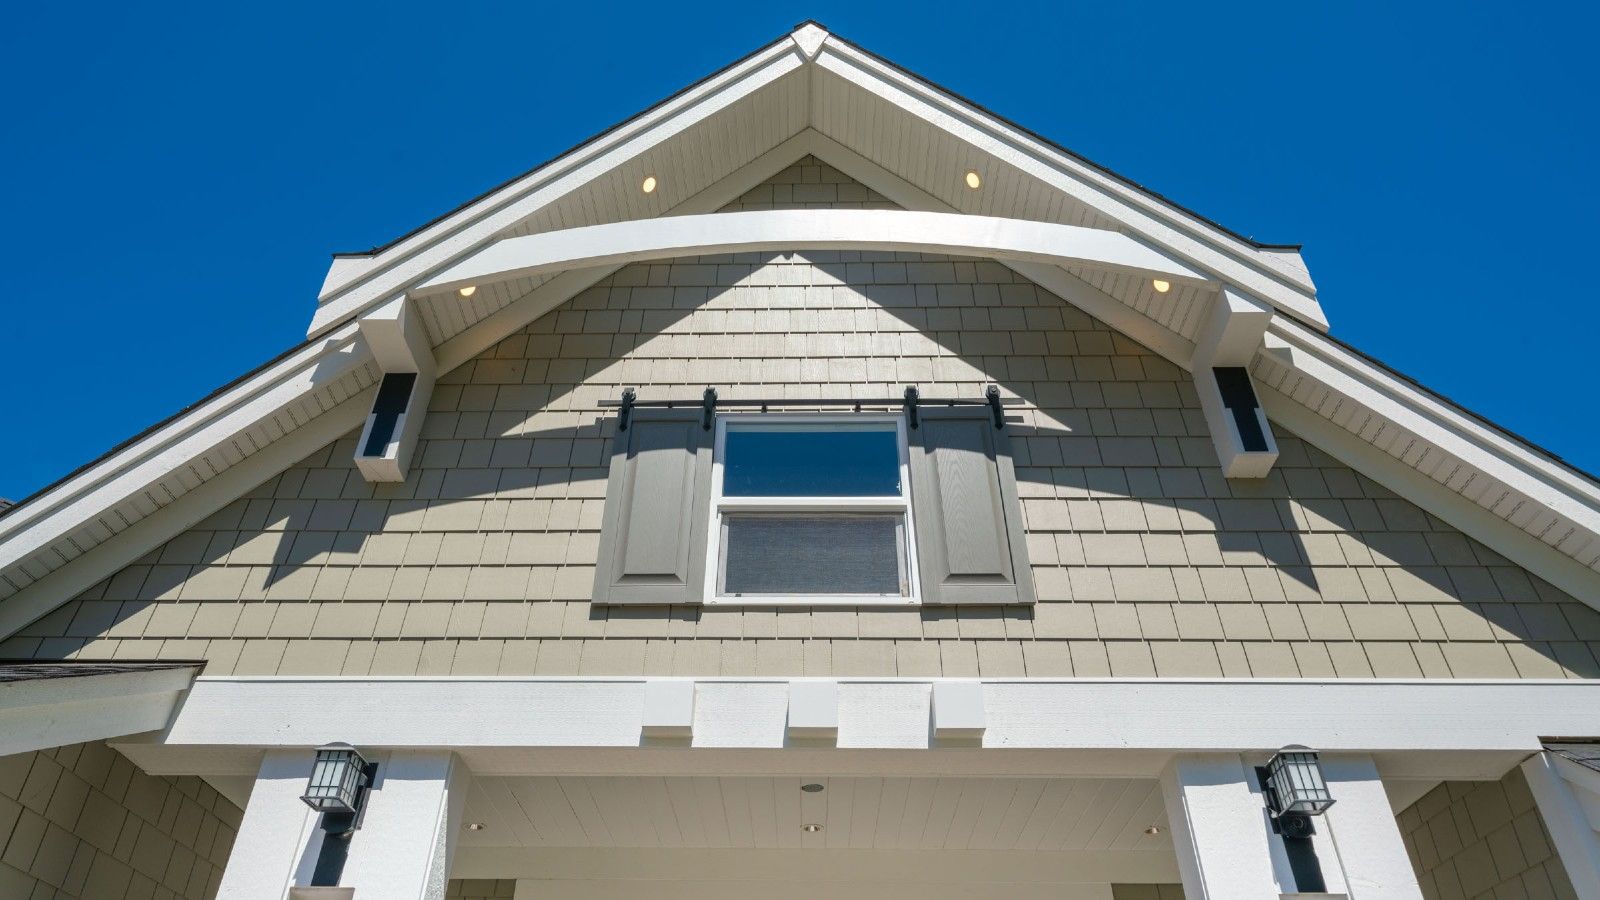 Image looking up at the front of a home with a blue sky in the background.